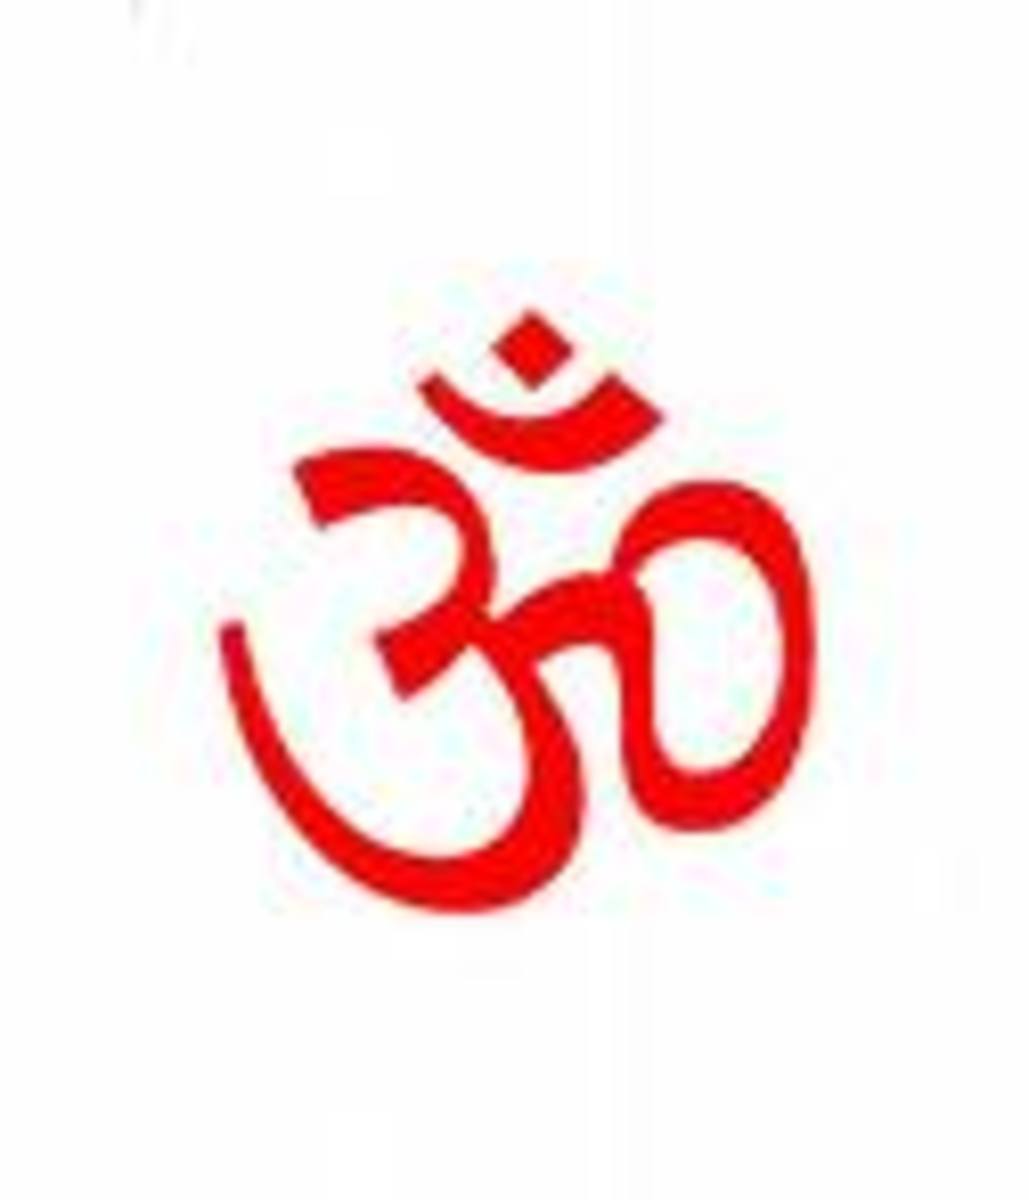 Om is the symbol for the whole universe. It carries three basic sounds: A-U-M. These three basic sounds through which all the sounds have evolved.